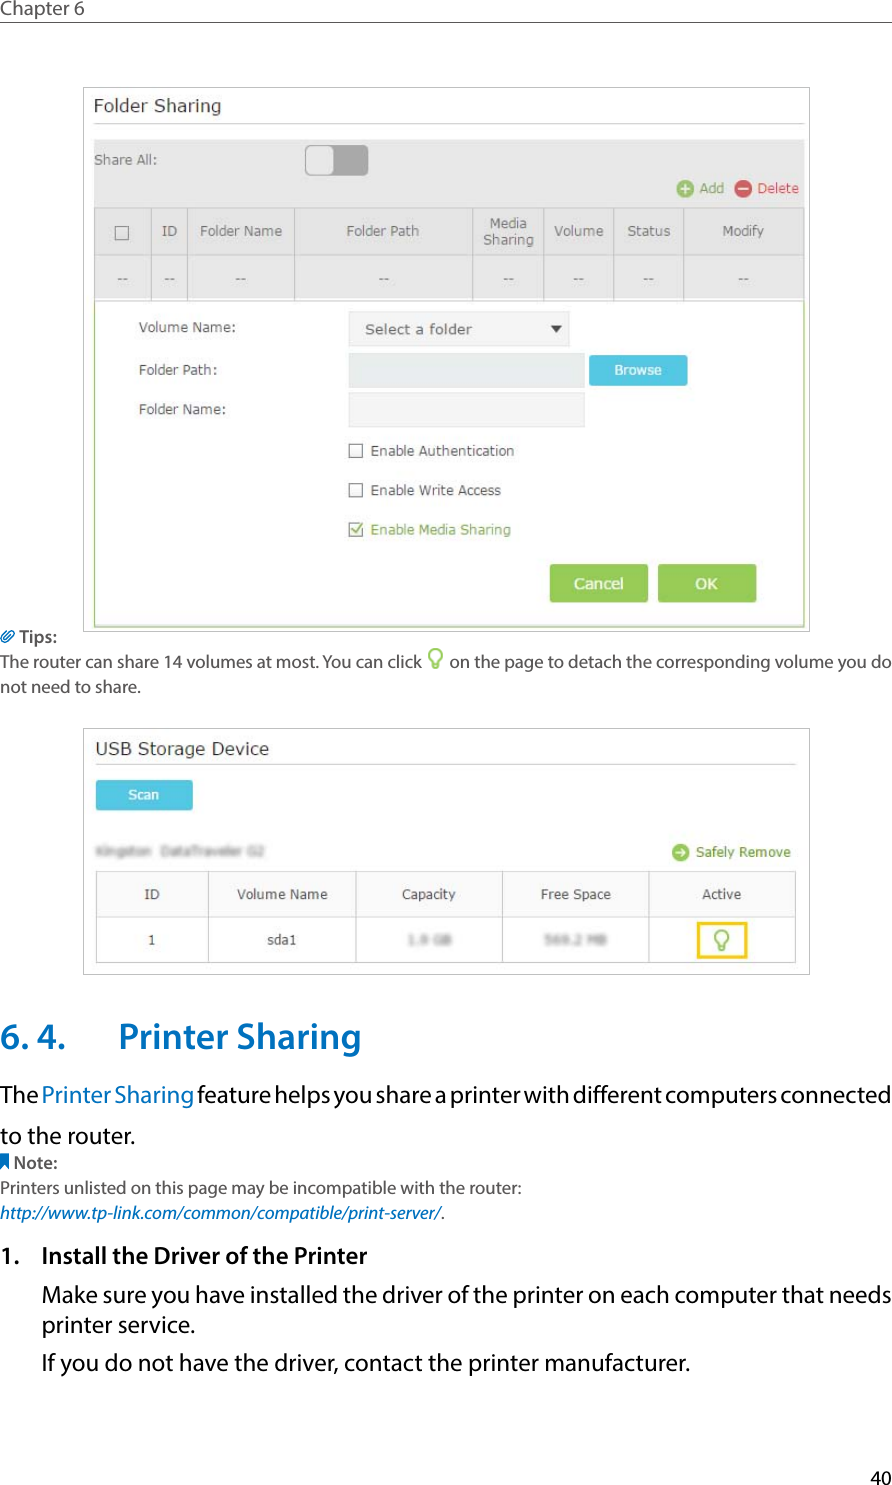 40Chapter 6  Tips:The router can share 14 volumes at most. You can click   on the page to detach the corresponding volume you do not need to share.6. 4.  Printer SharingThe Printer Sharing feature helps you share a printer with different computers connectedto the router.Note:Printers unlisted on this page may be incompatible with the router: http://www.tp-link.com/common/compatible/print-server/.1.  Install the Driver of the PrinterMake sure you have installed the driver of the printer on each computer that needs printer service.If you do not have the driver, contact the printer manufacturer.